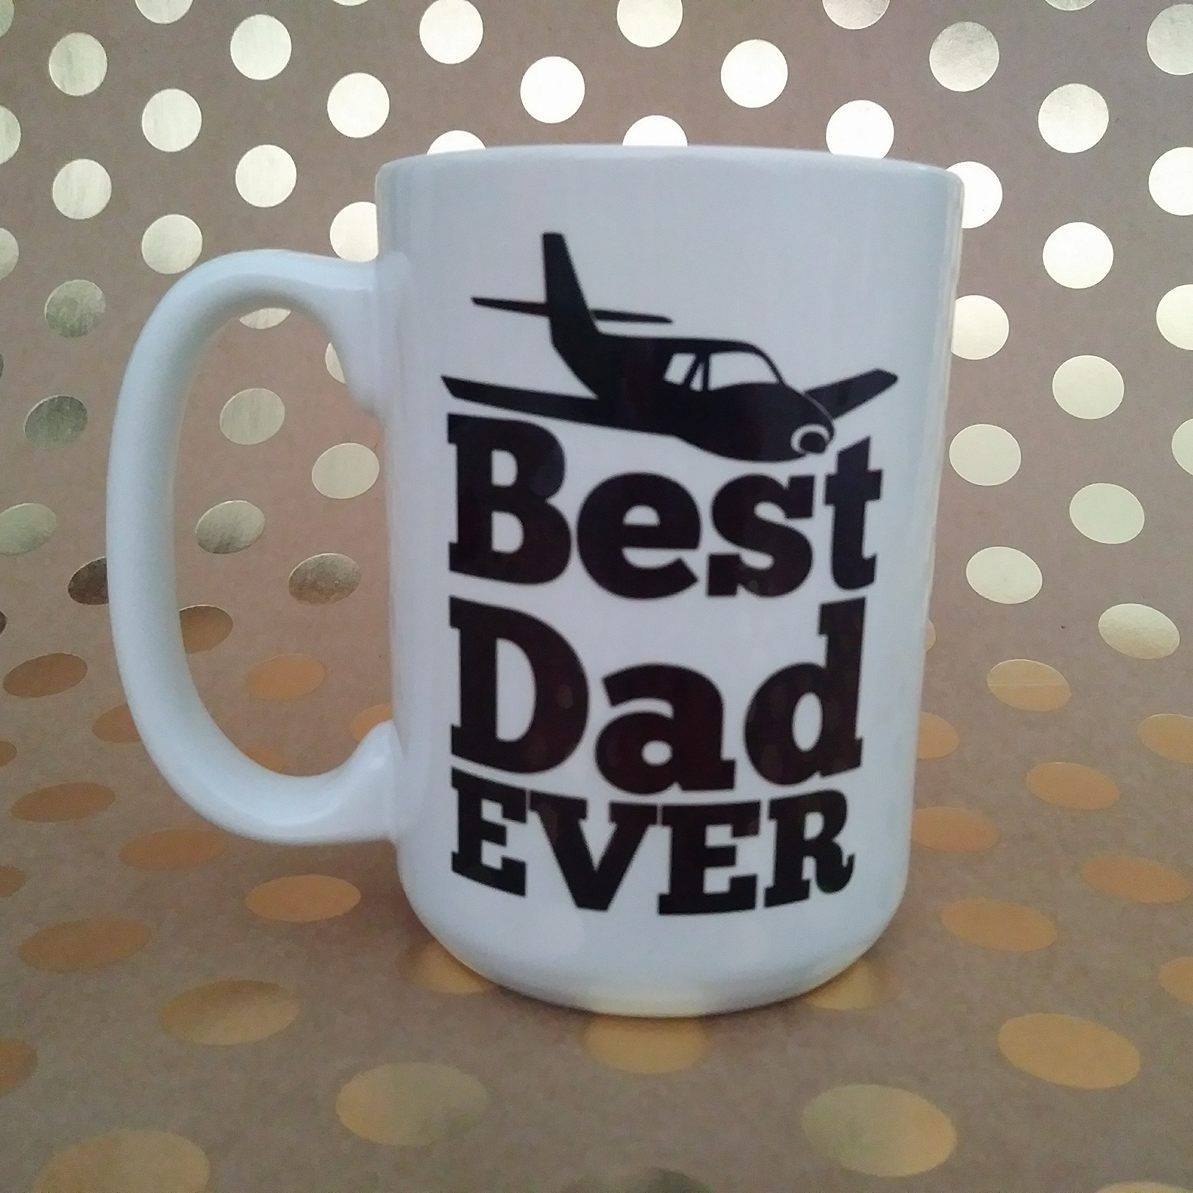 SBW Fathers Day Mug made with sublimation printing